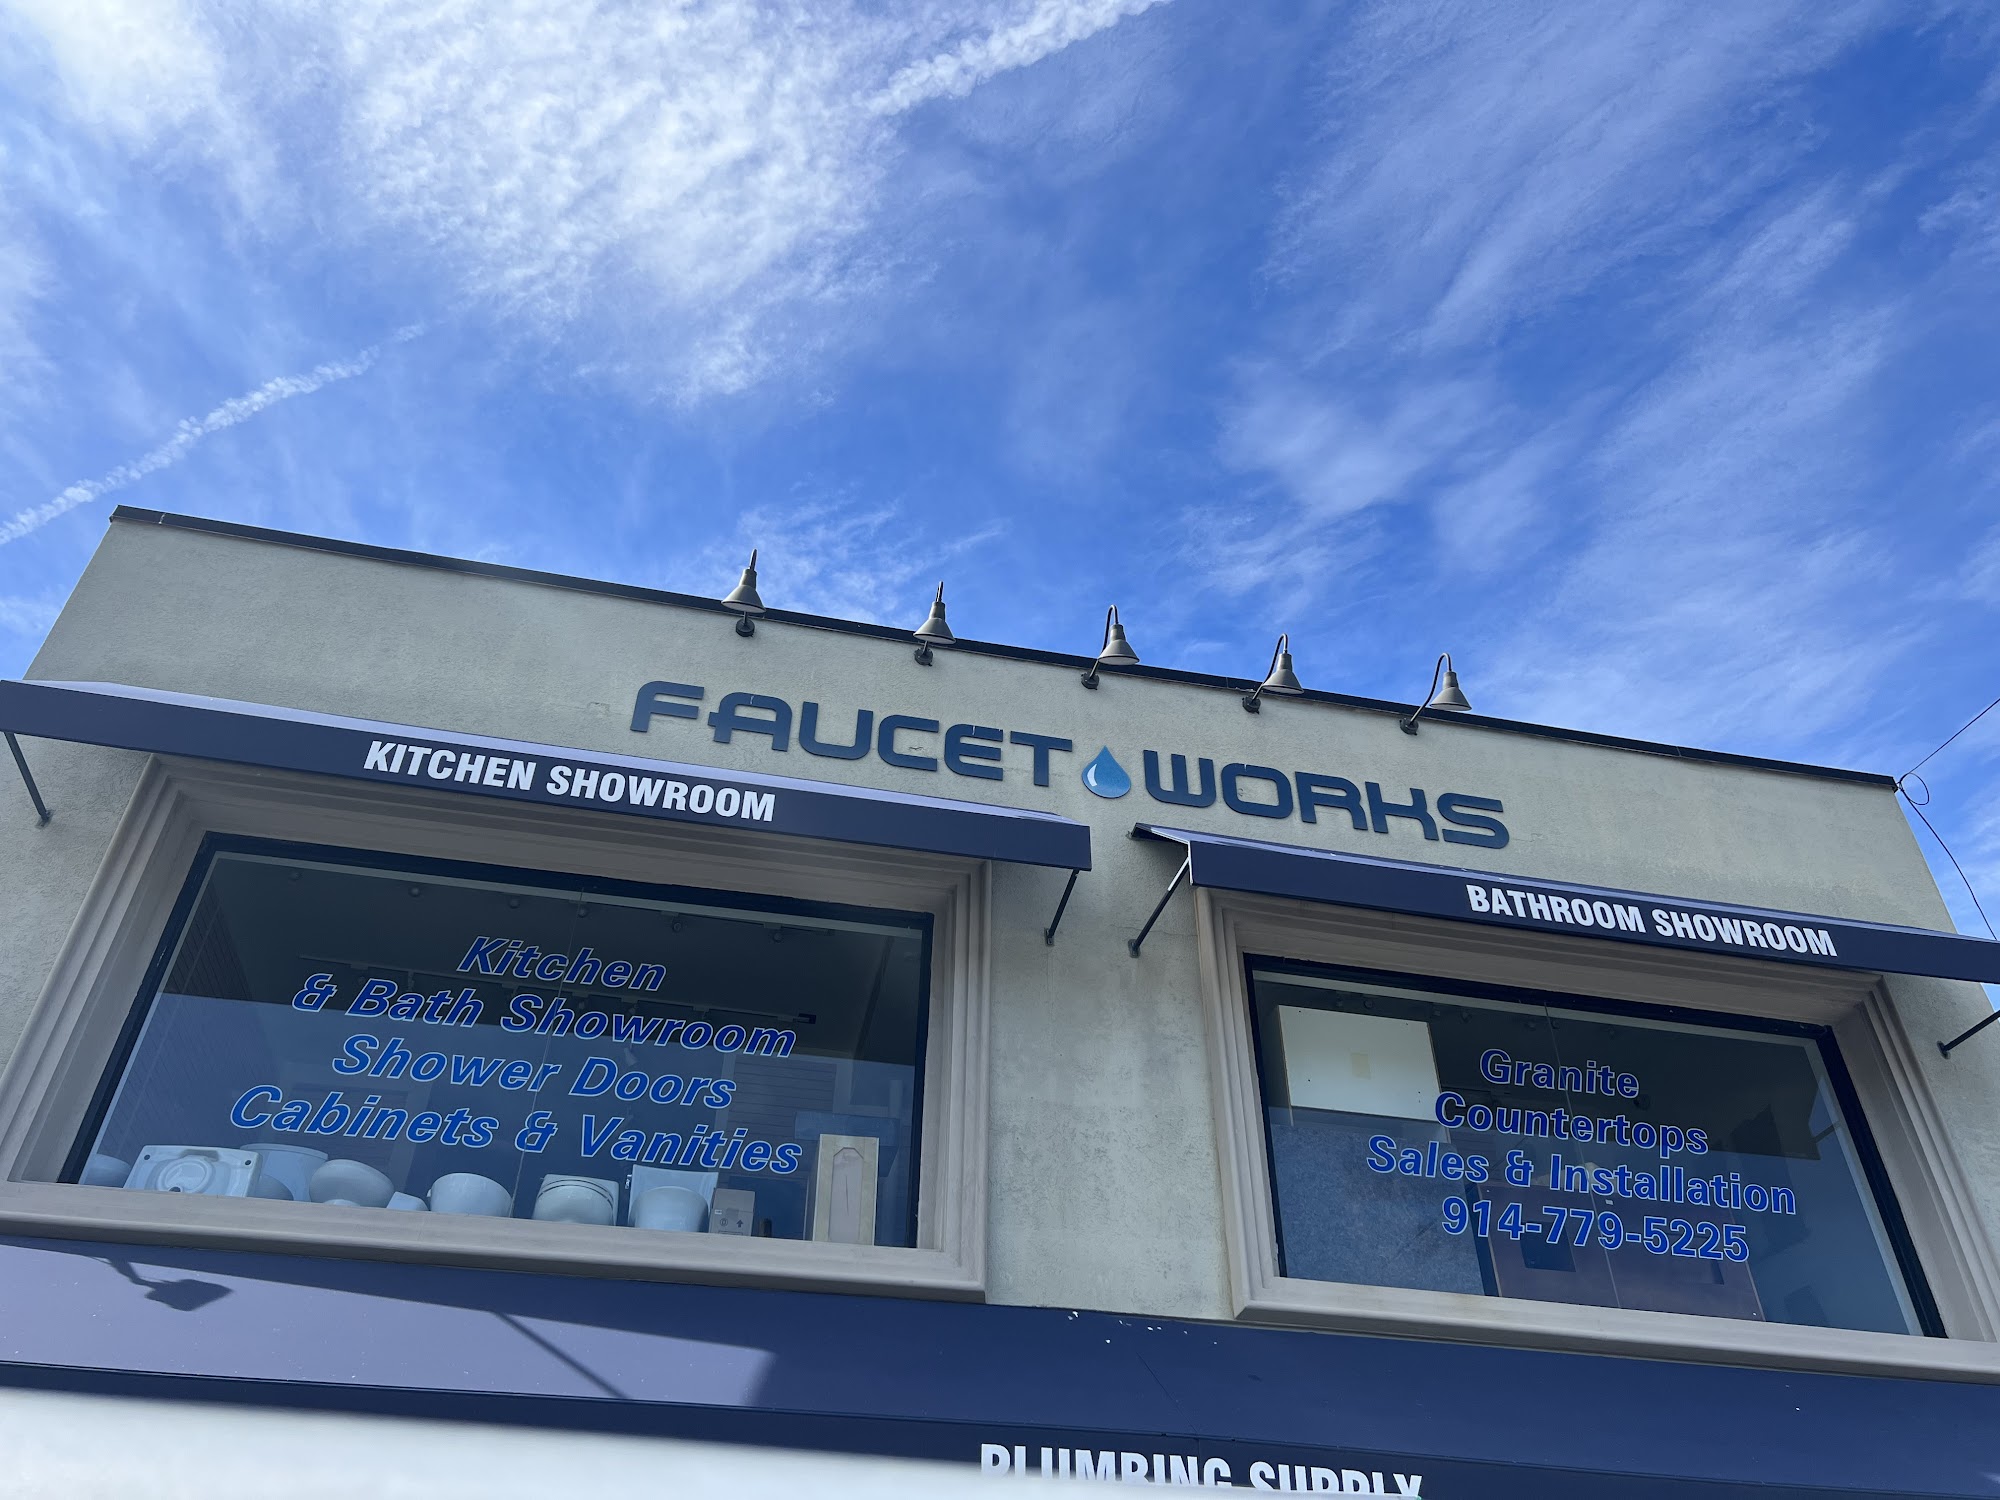 Faucet Works Plumbing Supply